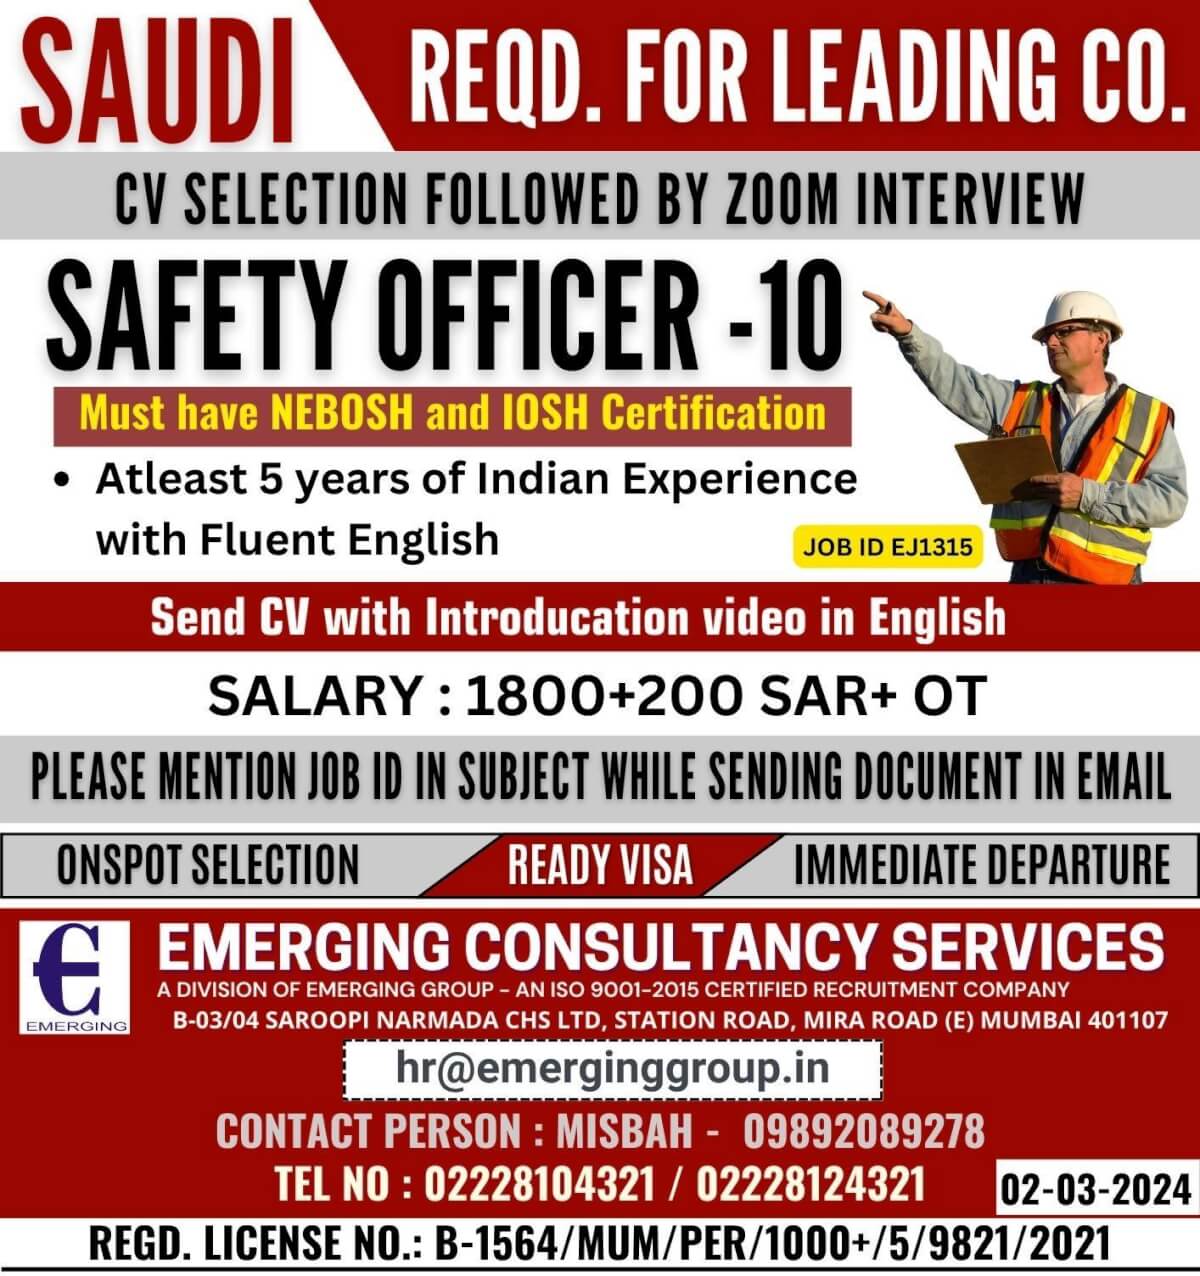 URGENTLY REQUIRED  SAFETY OFFICER FOR LEADING COMPANY IN SAUDI ARABIA